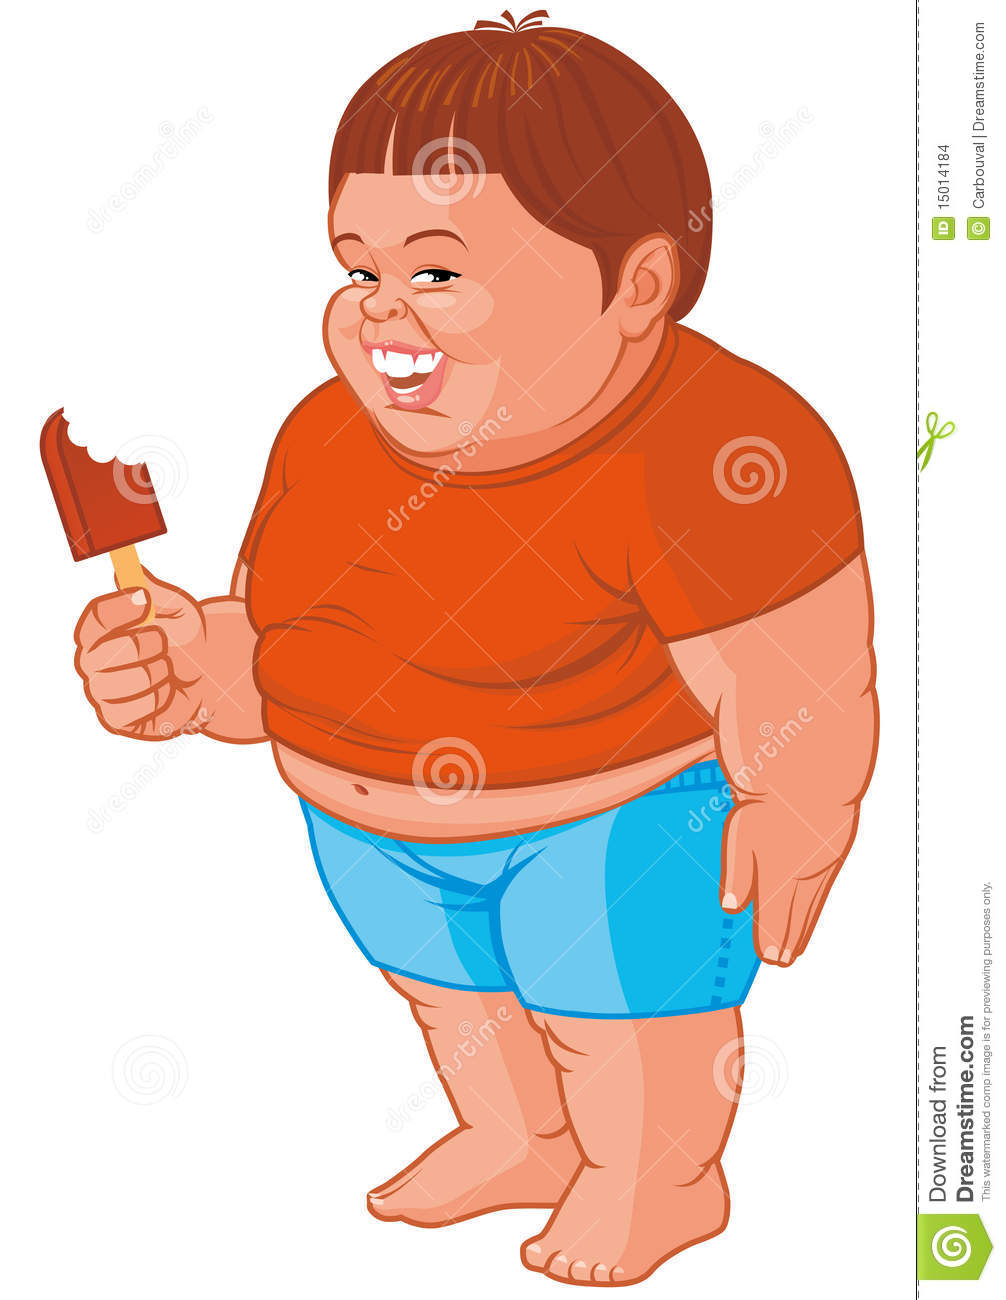 Fat Boy Stock Images   Image  15014184